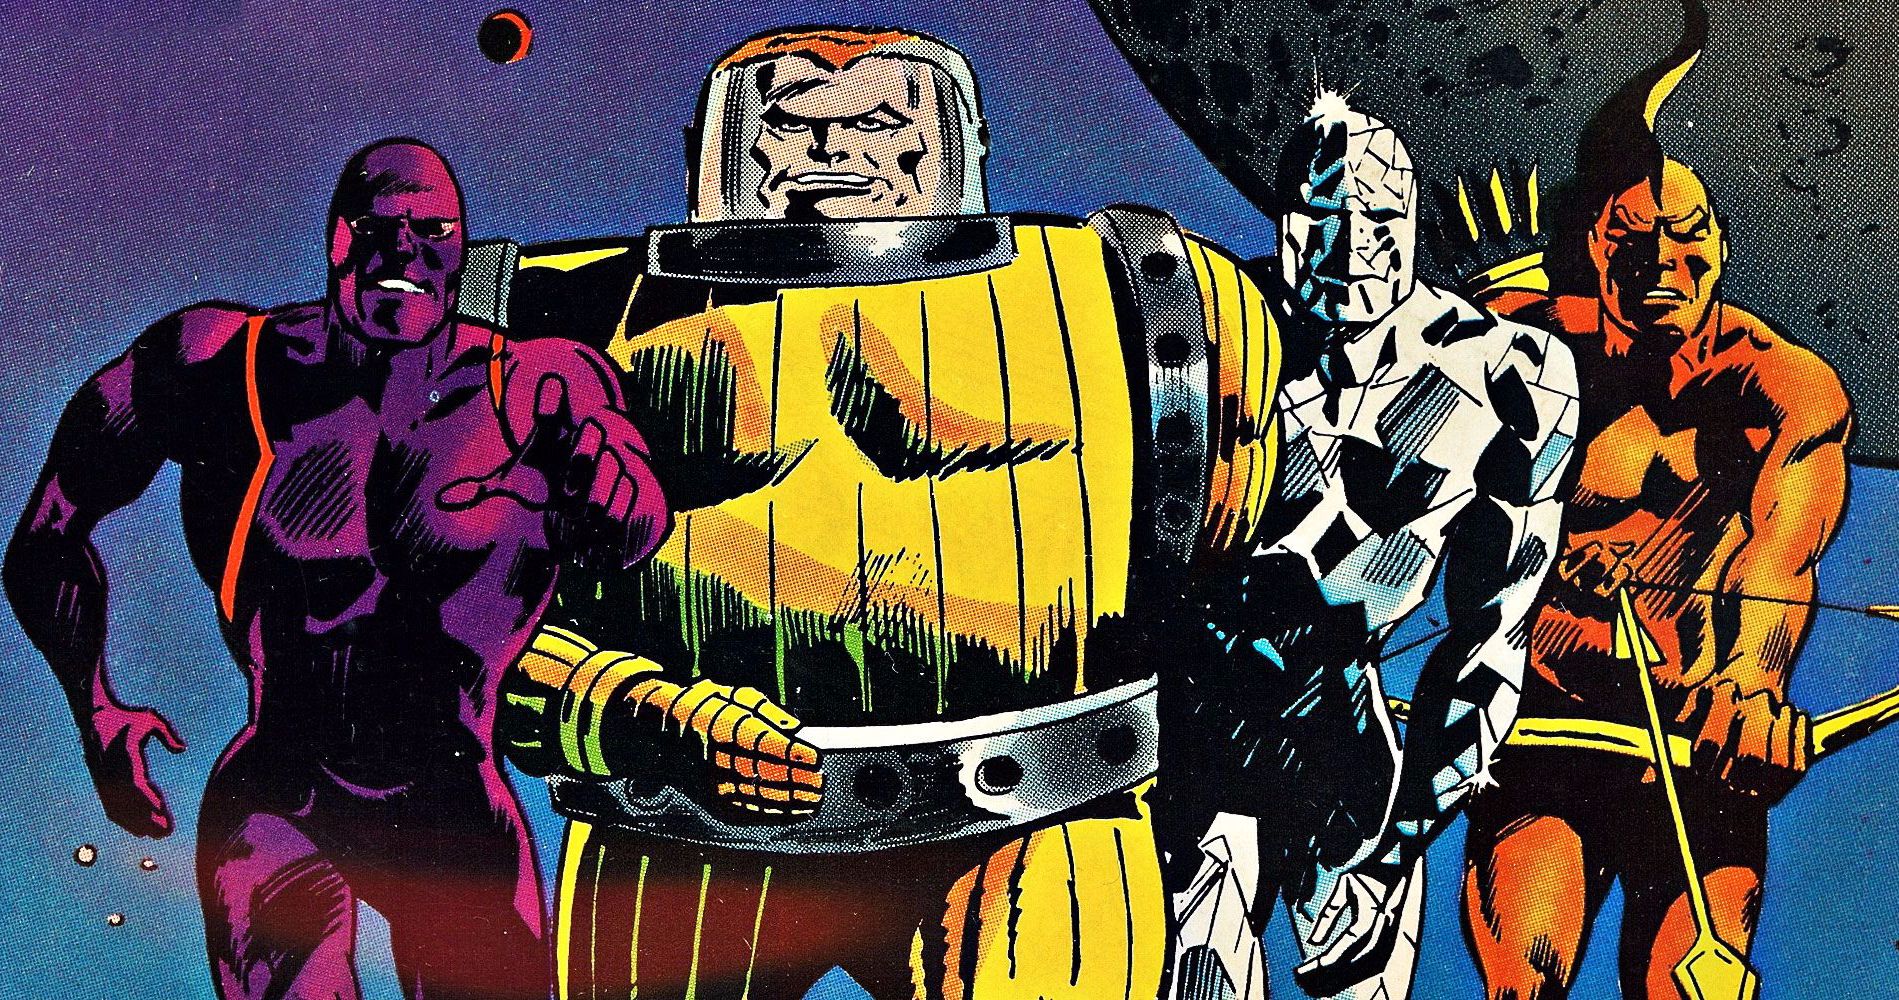 Guardians of the Galaxy 4 Will Probably Introduce a New Team of Marvel Superheroes